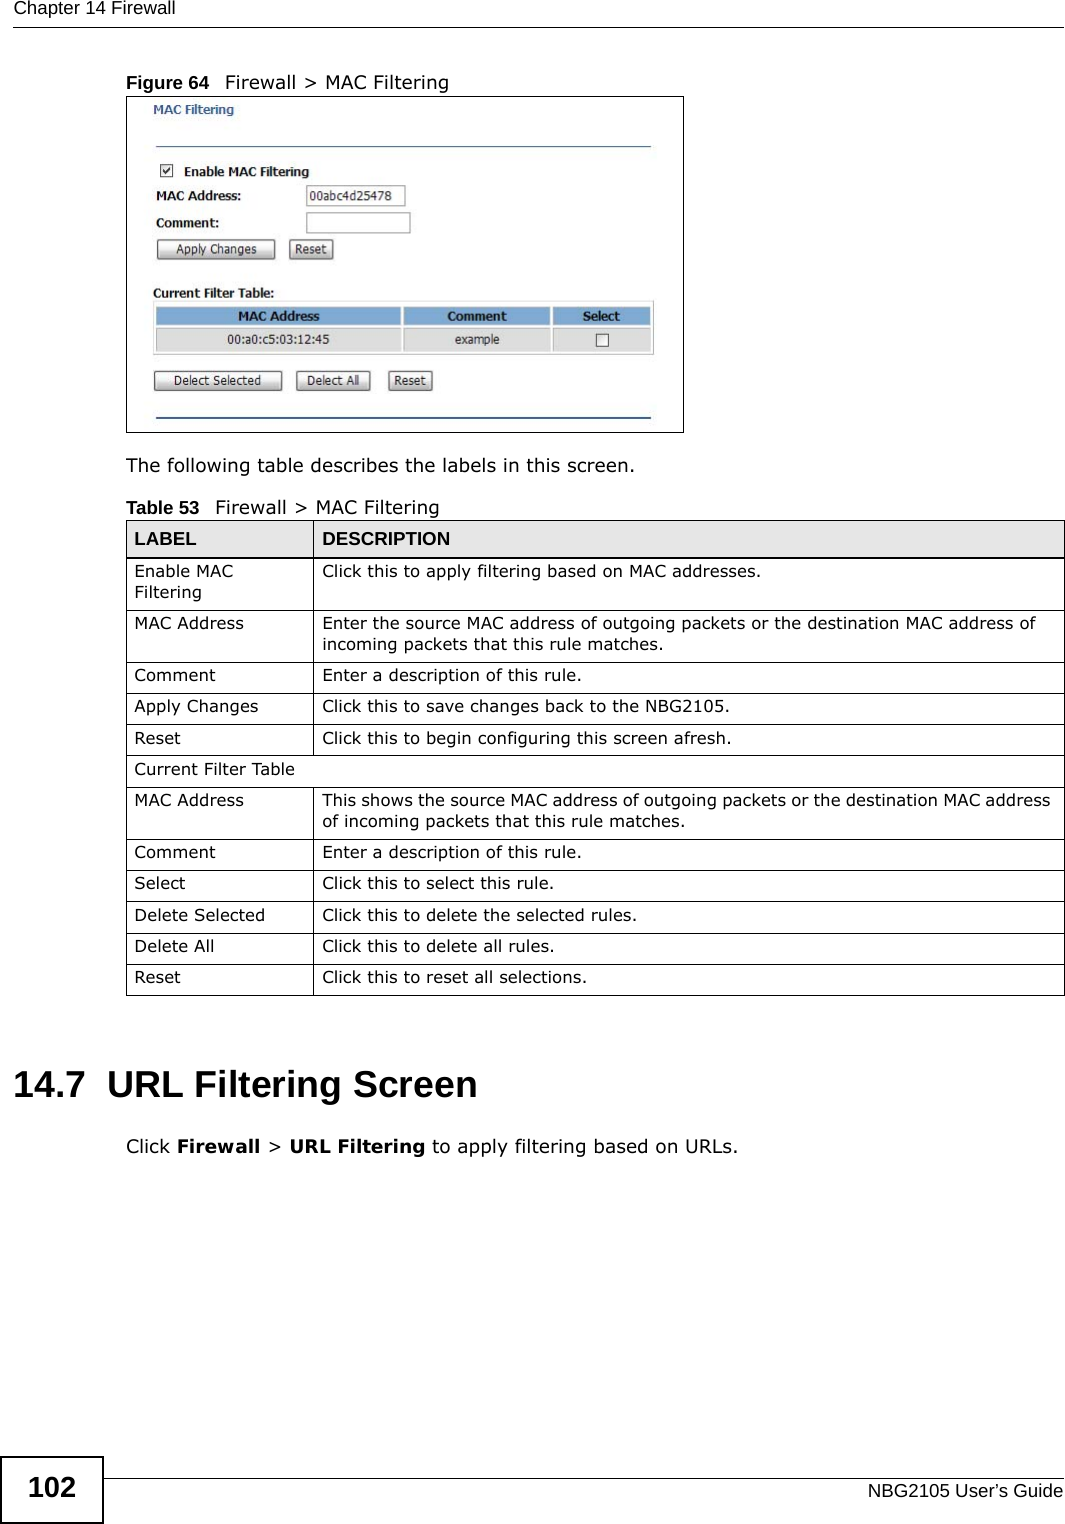 Chapter 14 FirewallNBG2105 User’s Guide102Figure 64   Firewall &gt; MAC Filtering The following table describes the labels in this screen.14.7  URL Filtering ScreenClick Firewall &gt; URL Filtering to apply filtering based on URLs.Table 53   Firewall &gt; MAC FilteringLABEL DESCRIPTIONEnable MAC FilteringClick this to apply filtering based on MAC addresses.MAC Address Enter the source MAC address of outgoing packets or the destination MAC address of incoming packets that this rule matches.Comment Enter a description of this rule.Apply Changes Click this to save changes back to the NBG2105.Reset Click this to begin configuring this screen afresh.Current Filter TableMAC Address This shows the source MAC address of outgoing packets or the destination MAC address of incoming packets that this rule matches.Comment Enter a description of this rule.Select Click this to select this rule.Delete Selected Click this to delete the selected rules.Delete All Click this to delete all rules.Reset Click this to reset all selections.